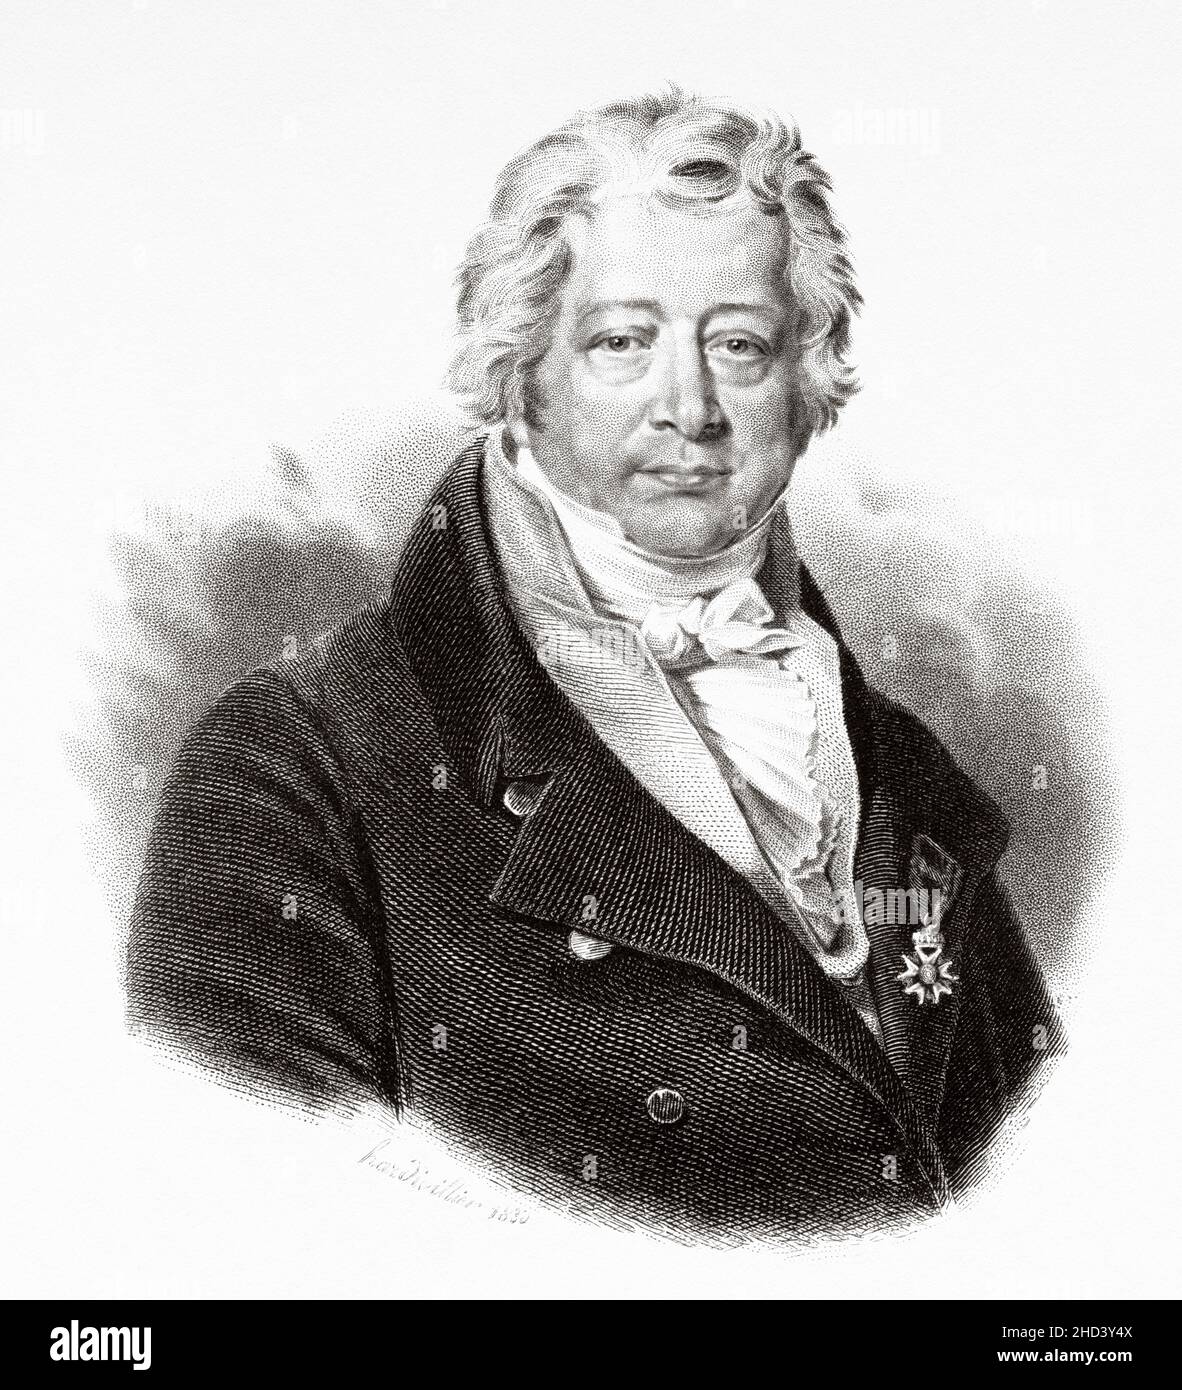 Sébastien Érard. Sebastian Erhard (1752-1831) was a French instrument maker of German origin who specialised in the production of pianos and harps. France. Europe. Old 19th century engraved illustration from Portraits et histoire des hommes utile by Societe Montyon et Franklin 1837 Stock Photo